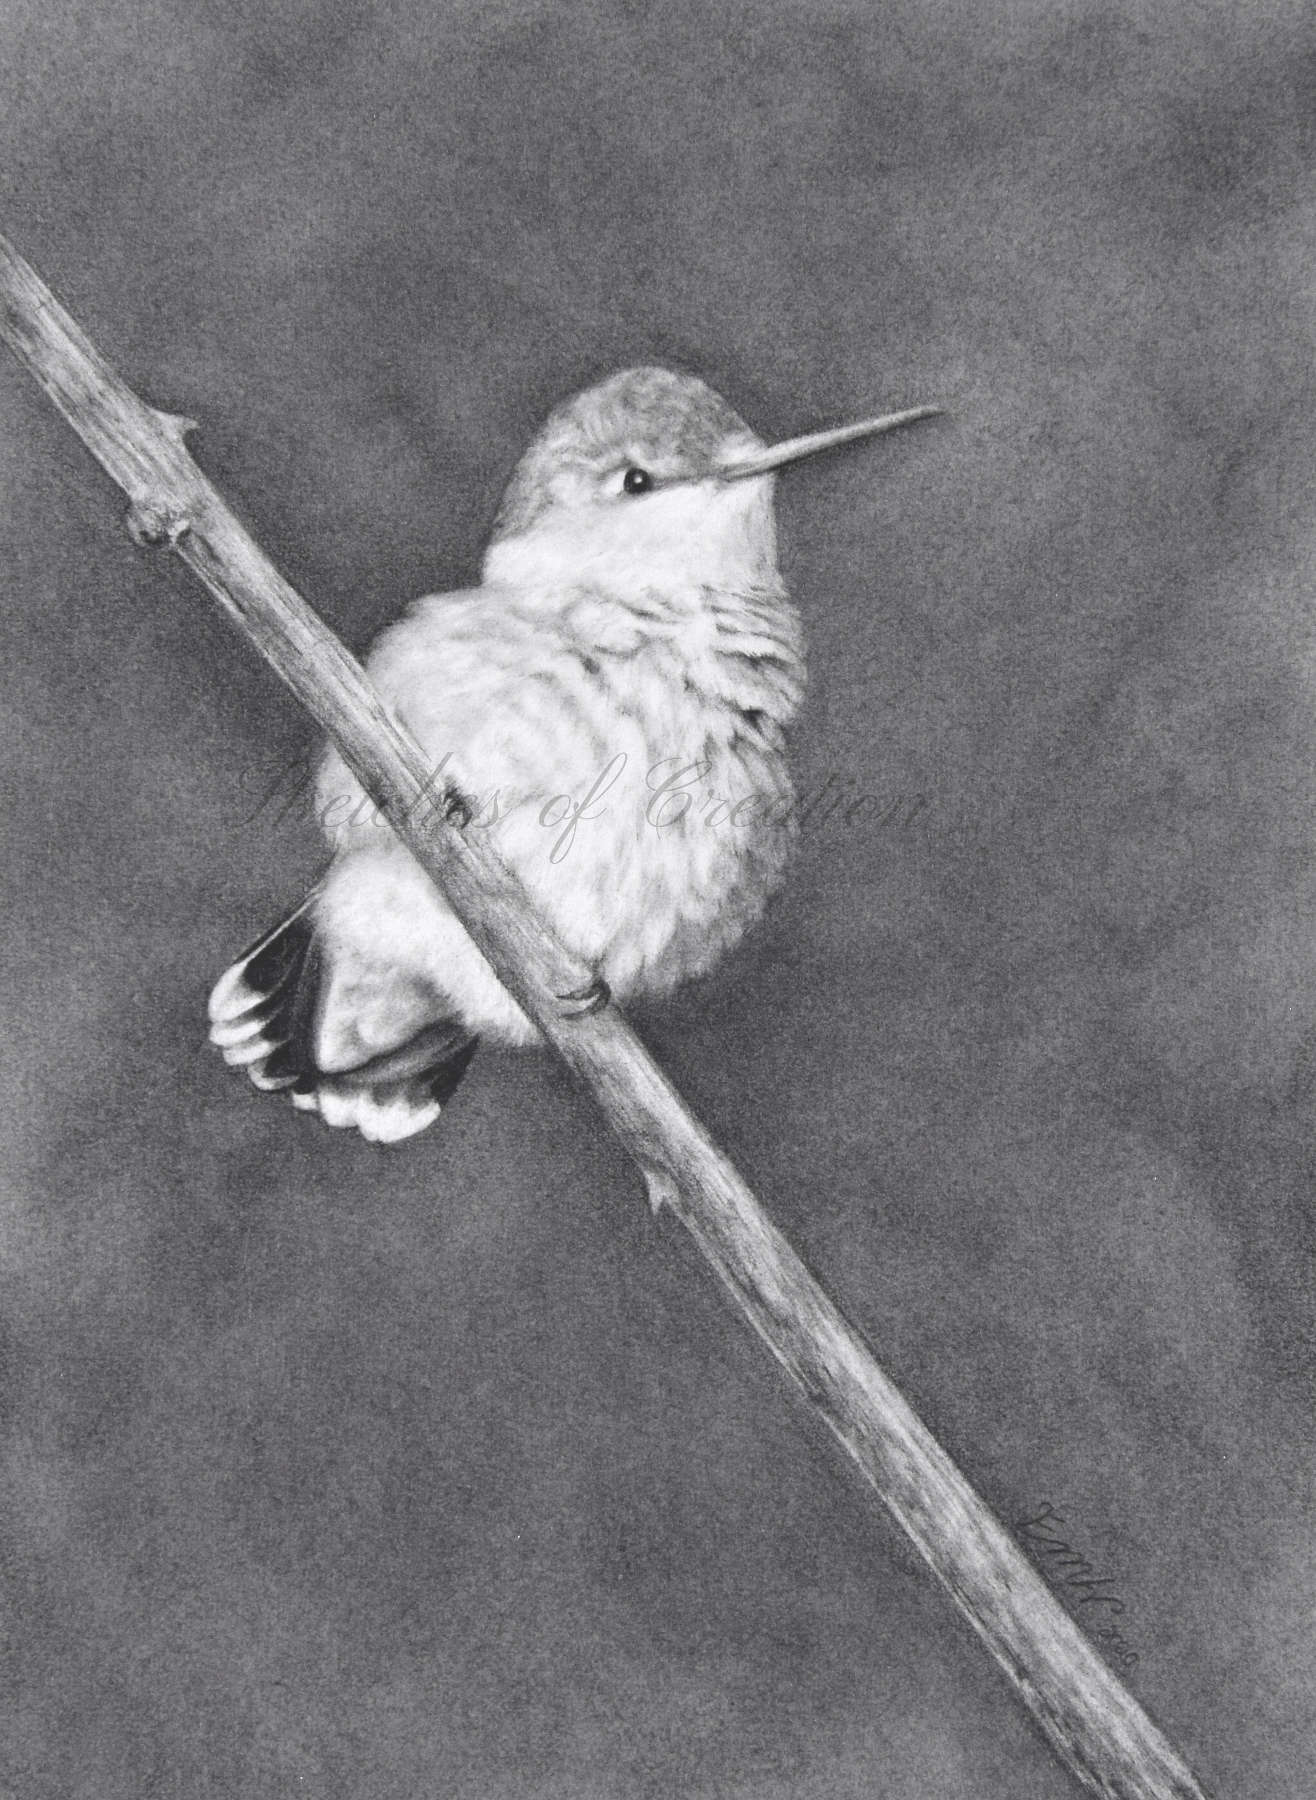 'Contentment' a drawing of a fluffy female Ruby-throated Hummingbird. 5x7 inches. Completed September 2020